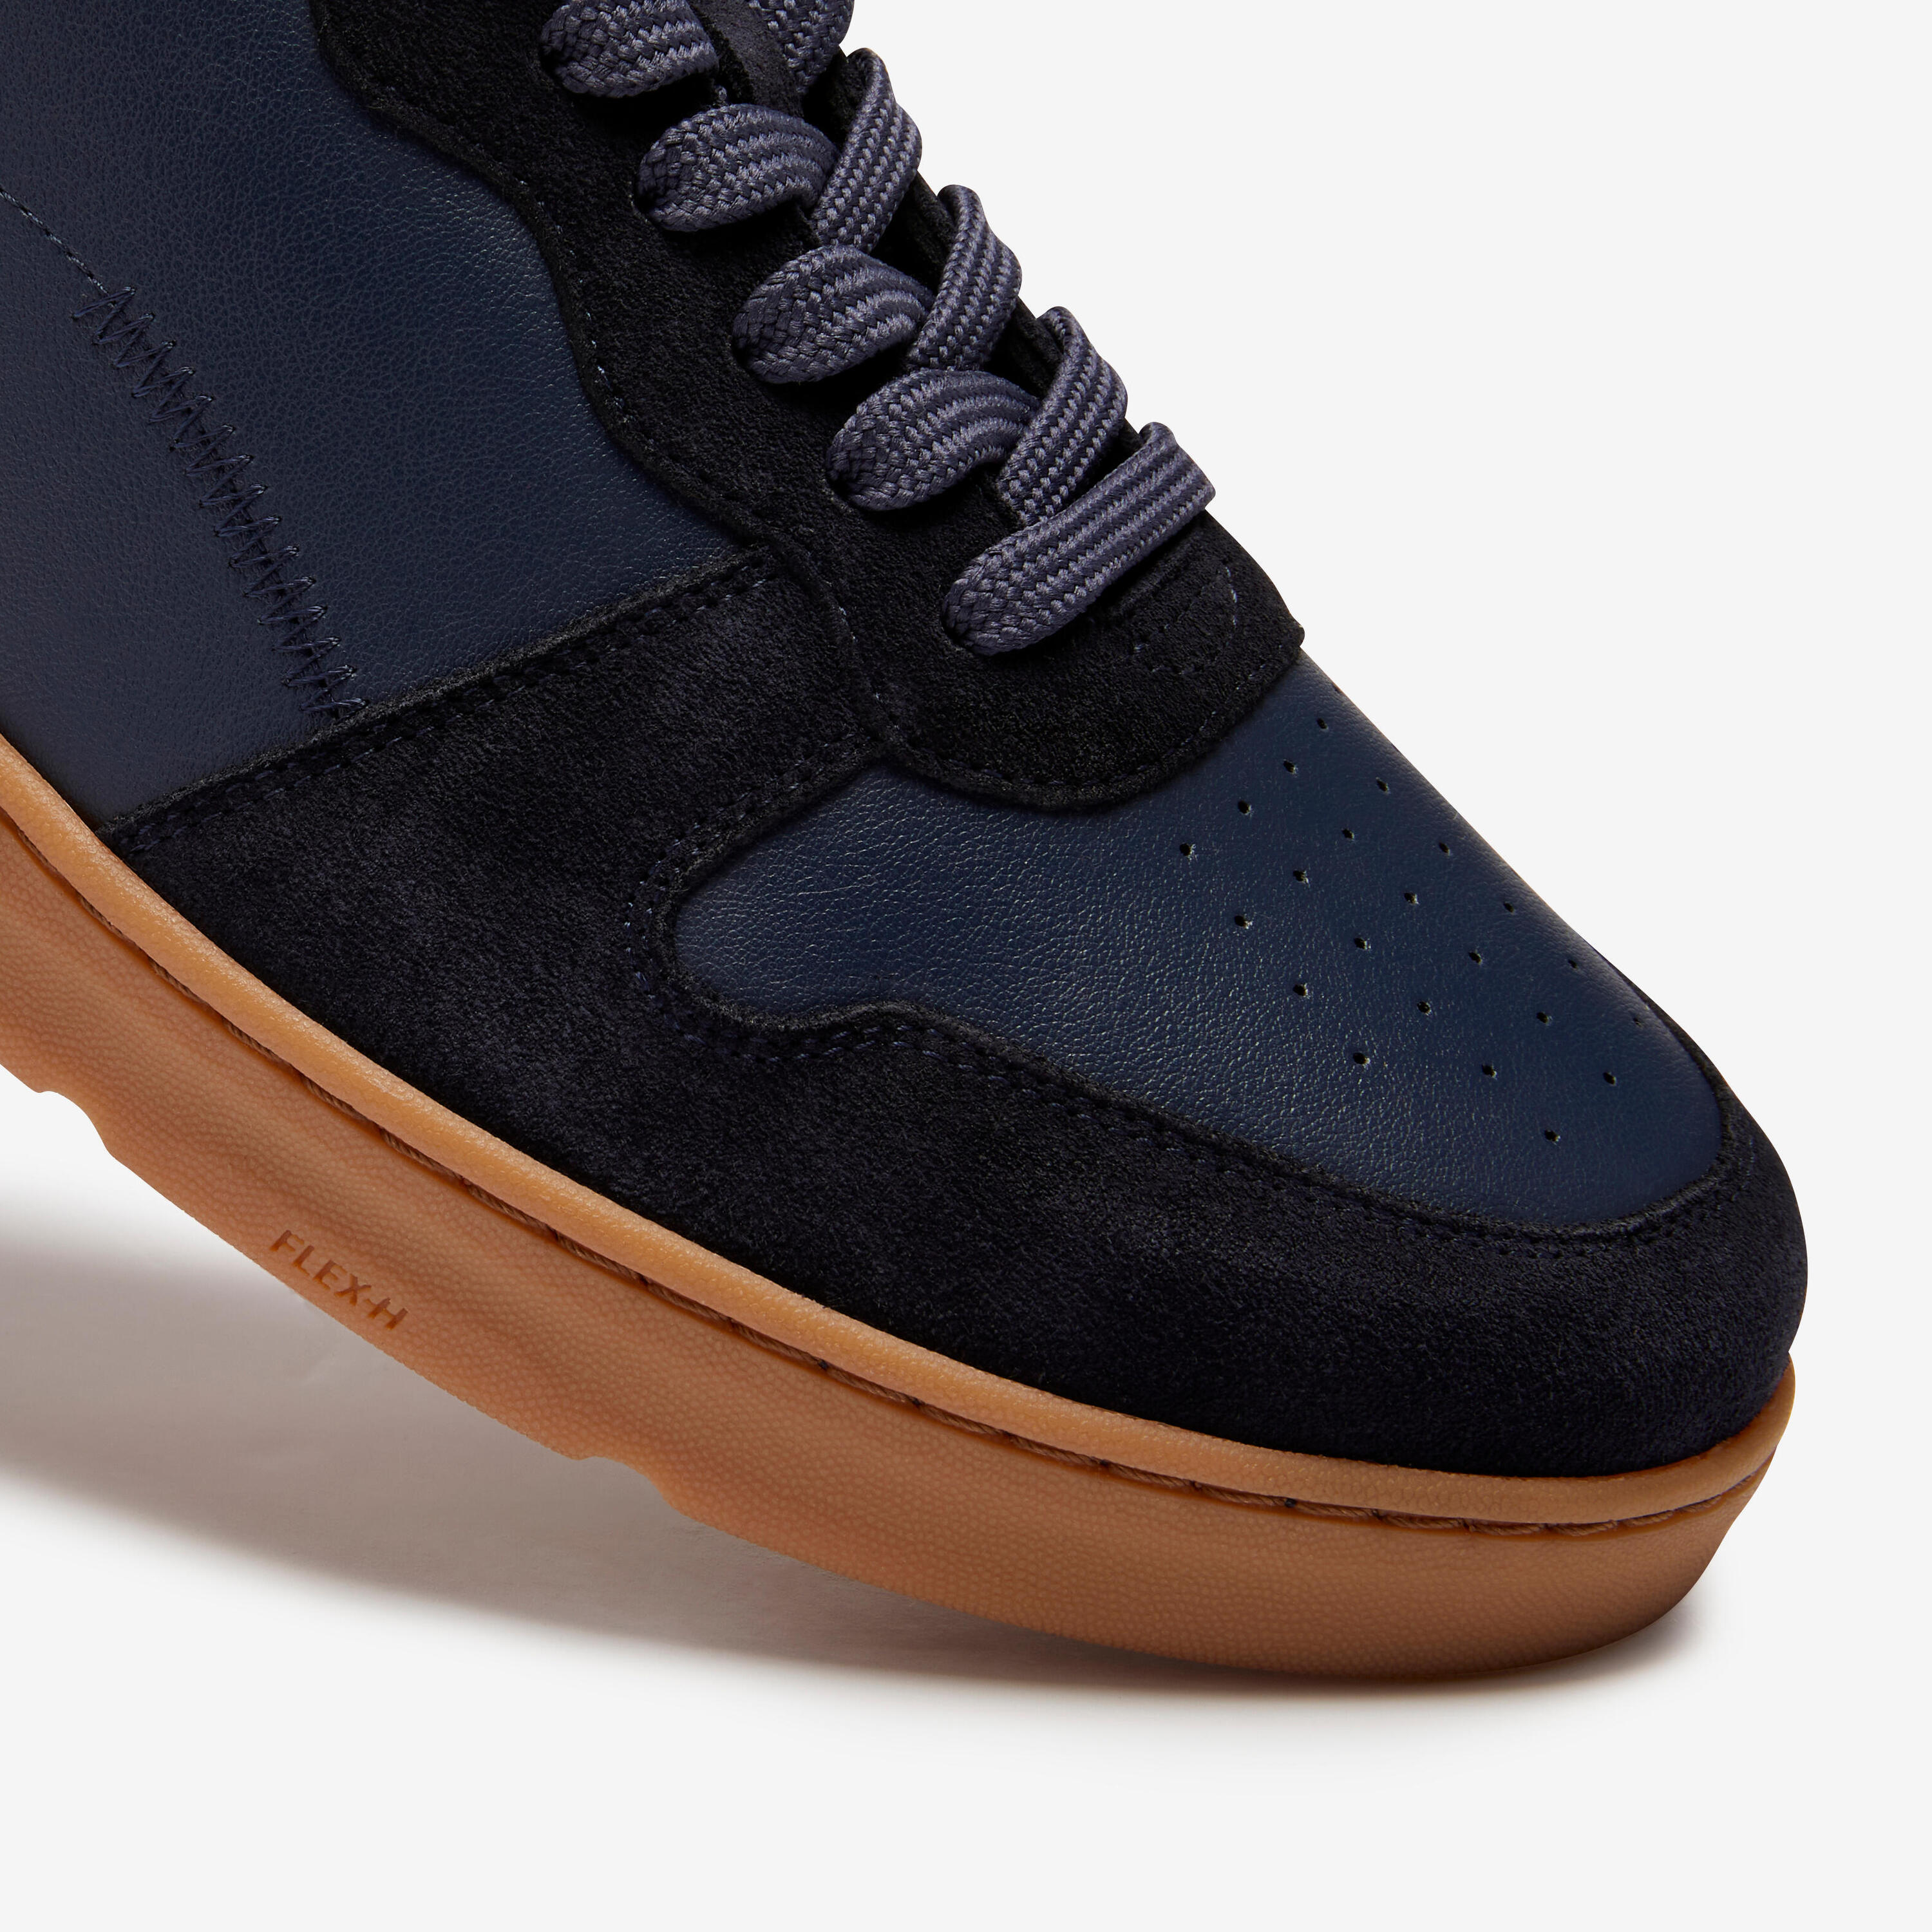 MEN'S WALK PROTECT LEATHER TRAINERS - NAVY BLUE 3/7